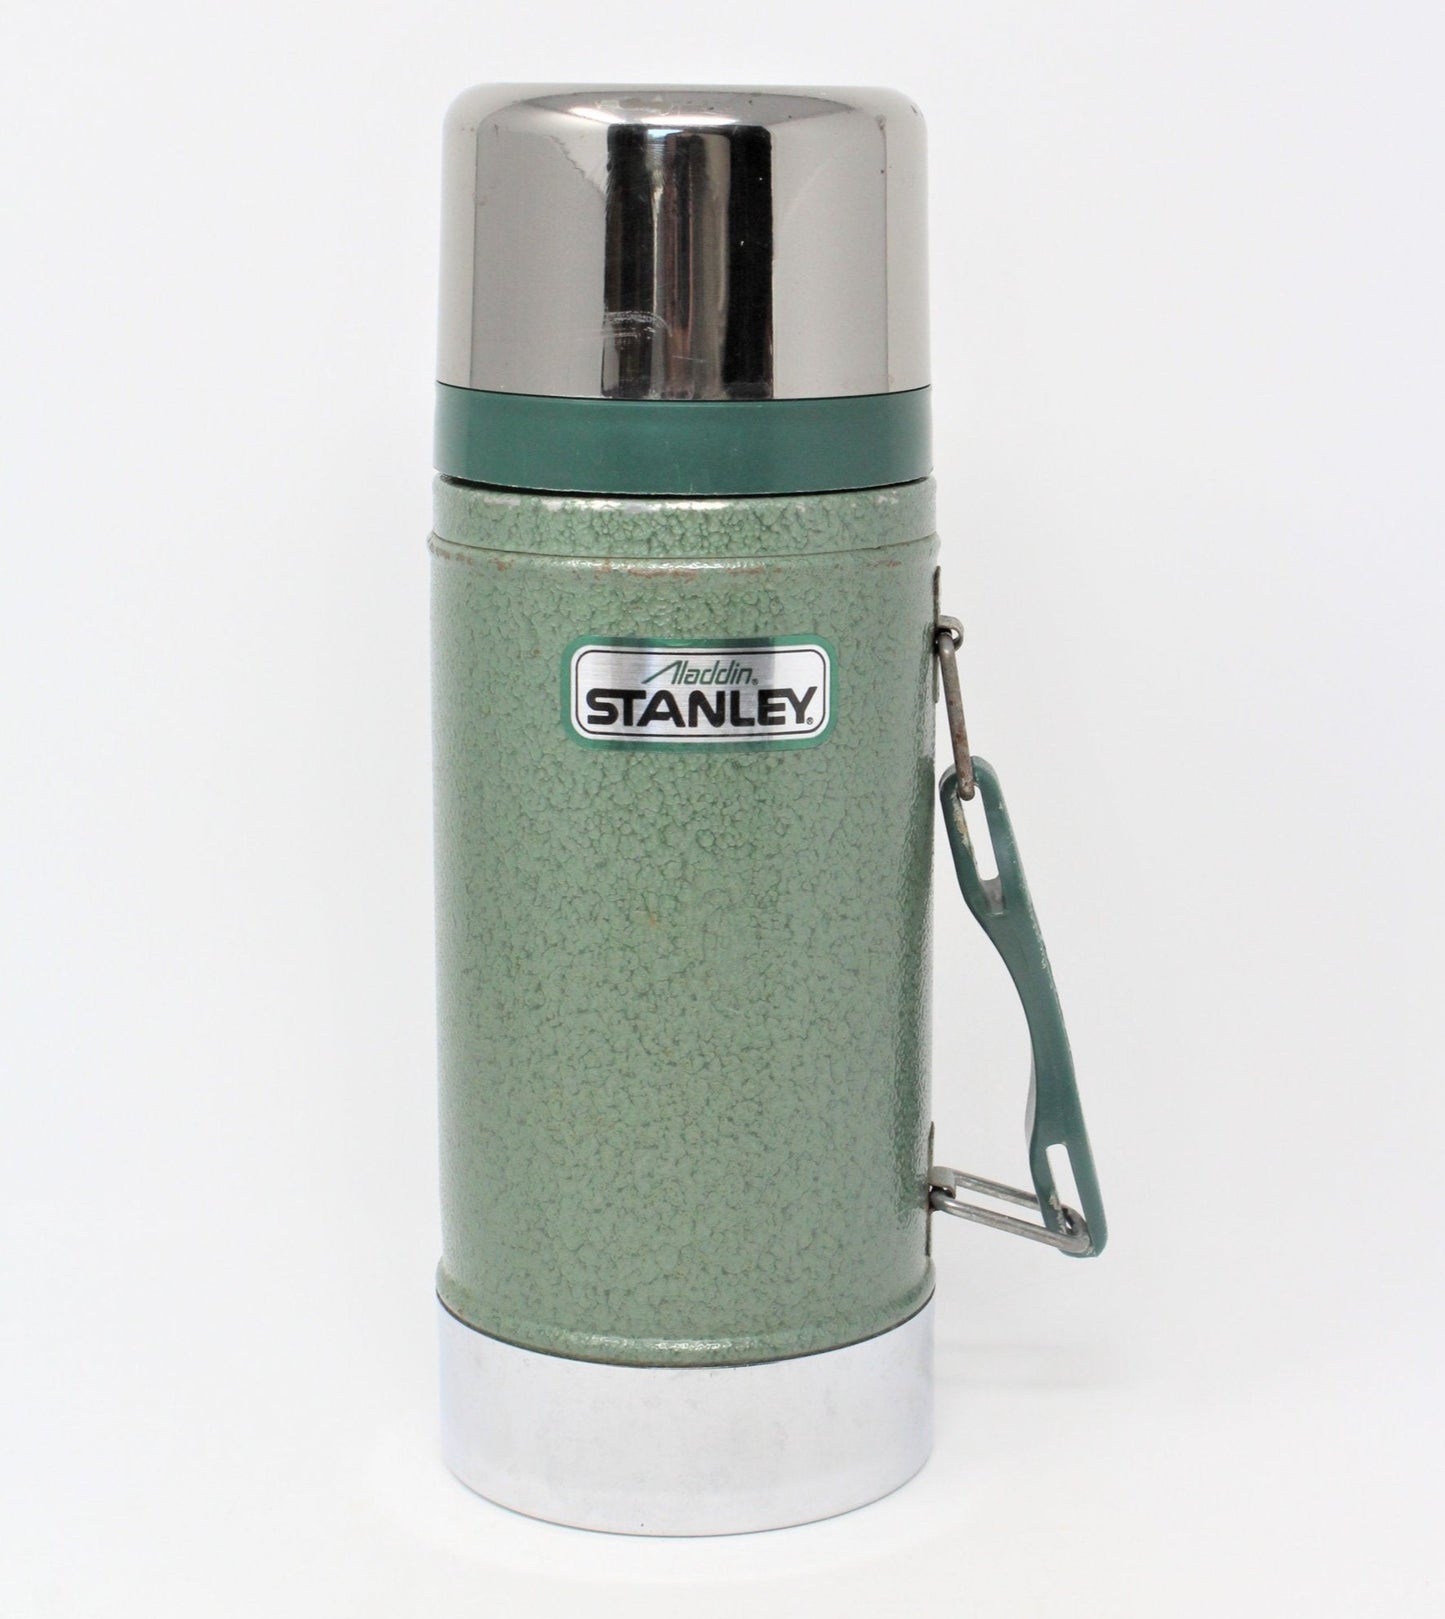 Aladdin's Stanley Thermos Cannisters - Sherwood Auctions